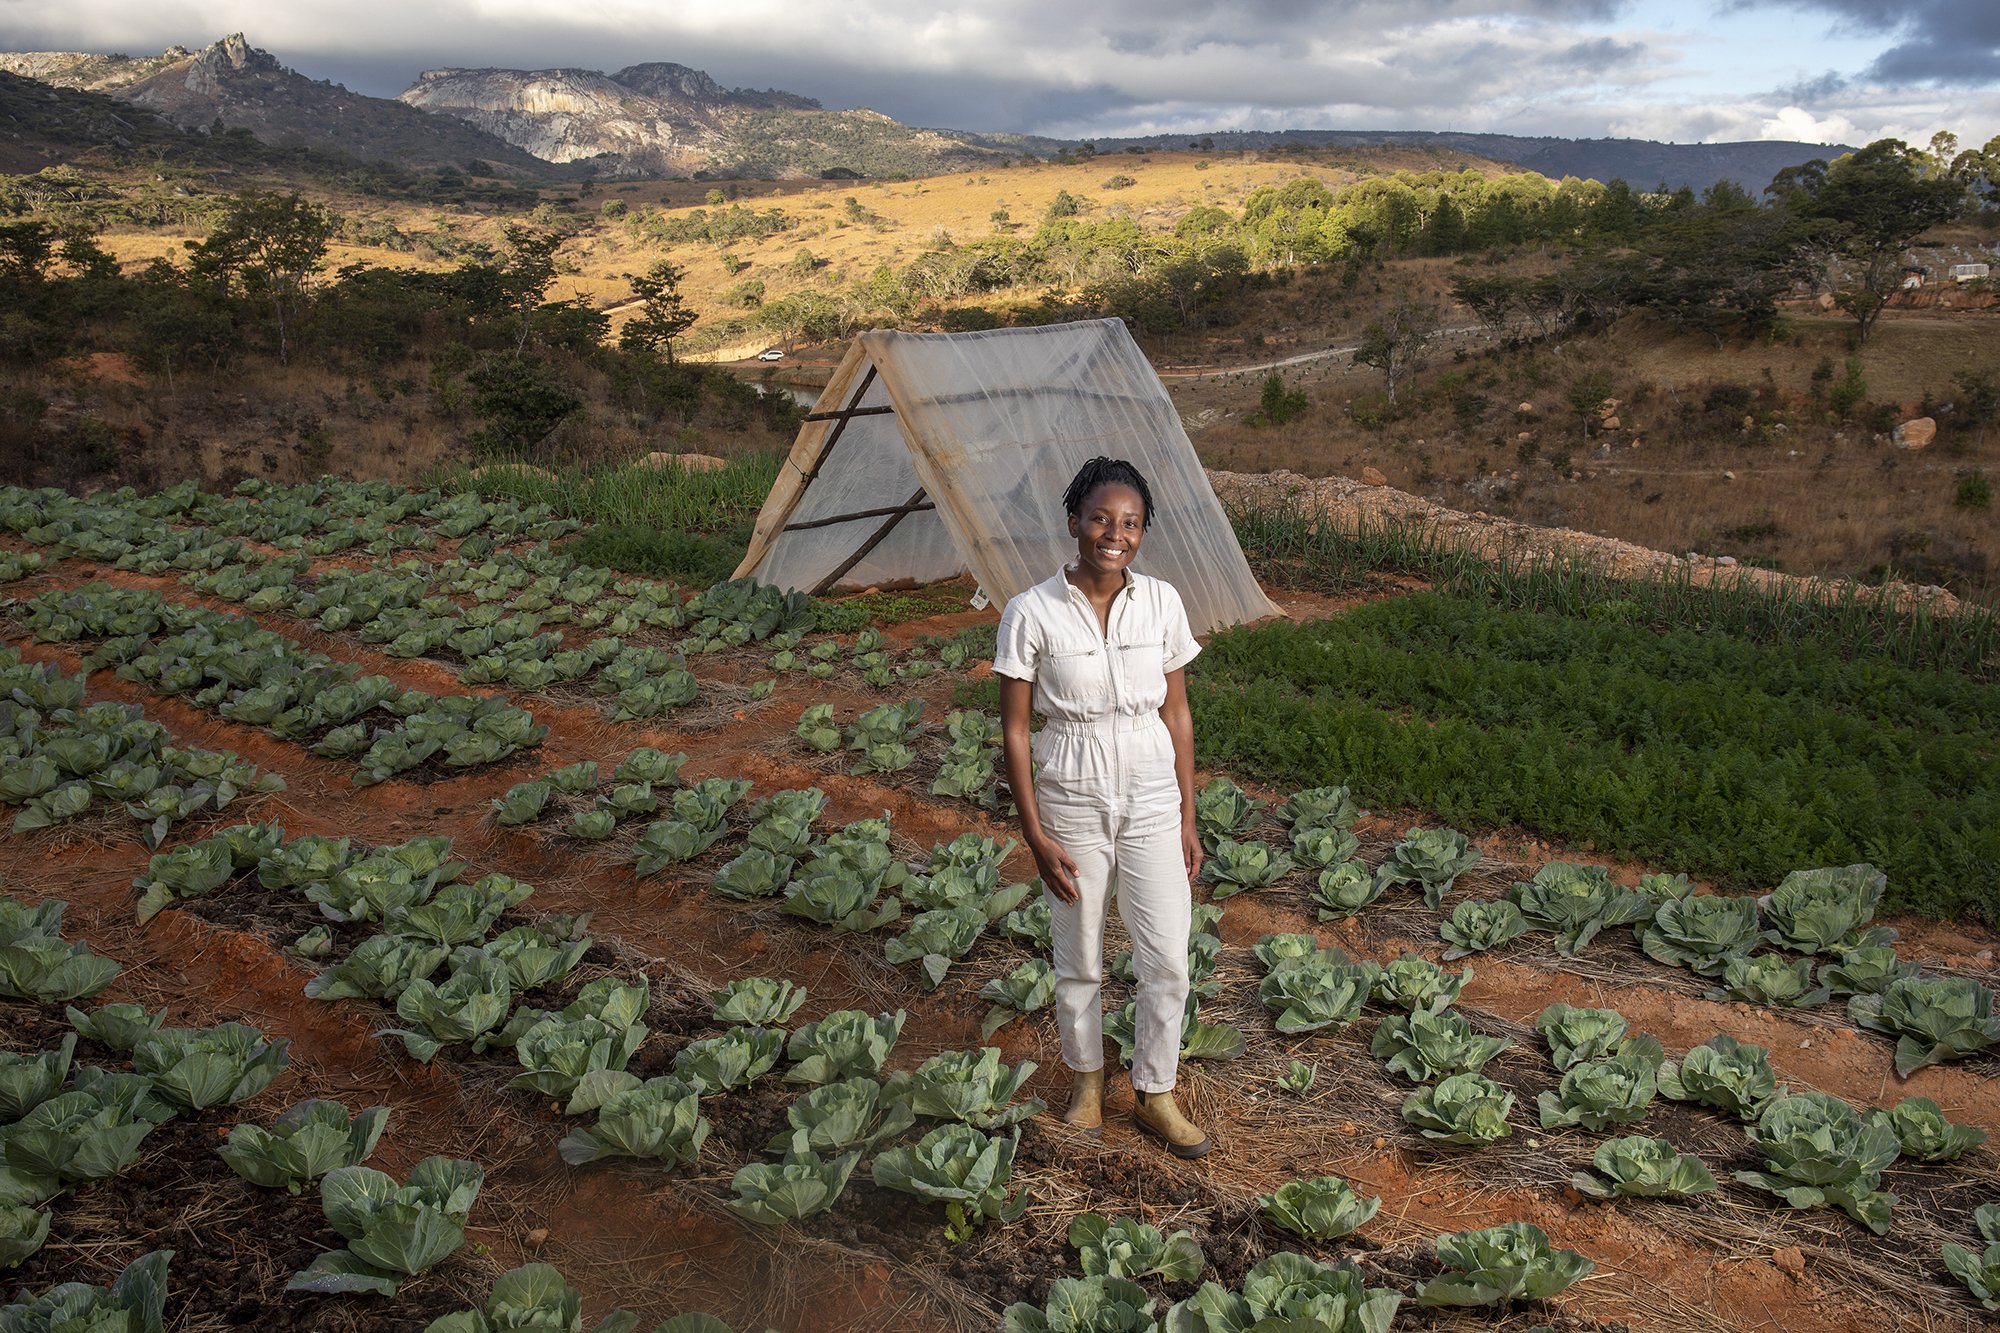  A portrait of Takudzwa Mutezo on her farm, Happi Meadows in Nyamazi, Nyanga. Mutezo lives in rural Zimbabwe where she is working as an independent environmental lawyer and wildlife protection advocate, in addition to running an organic farm. She is 